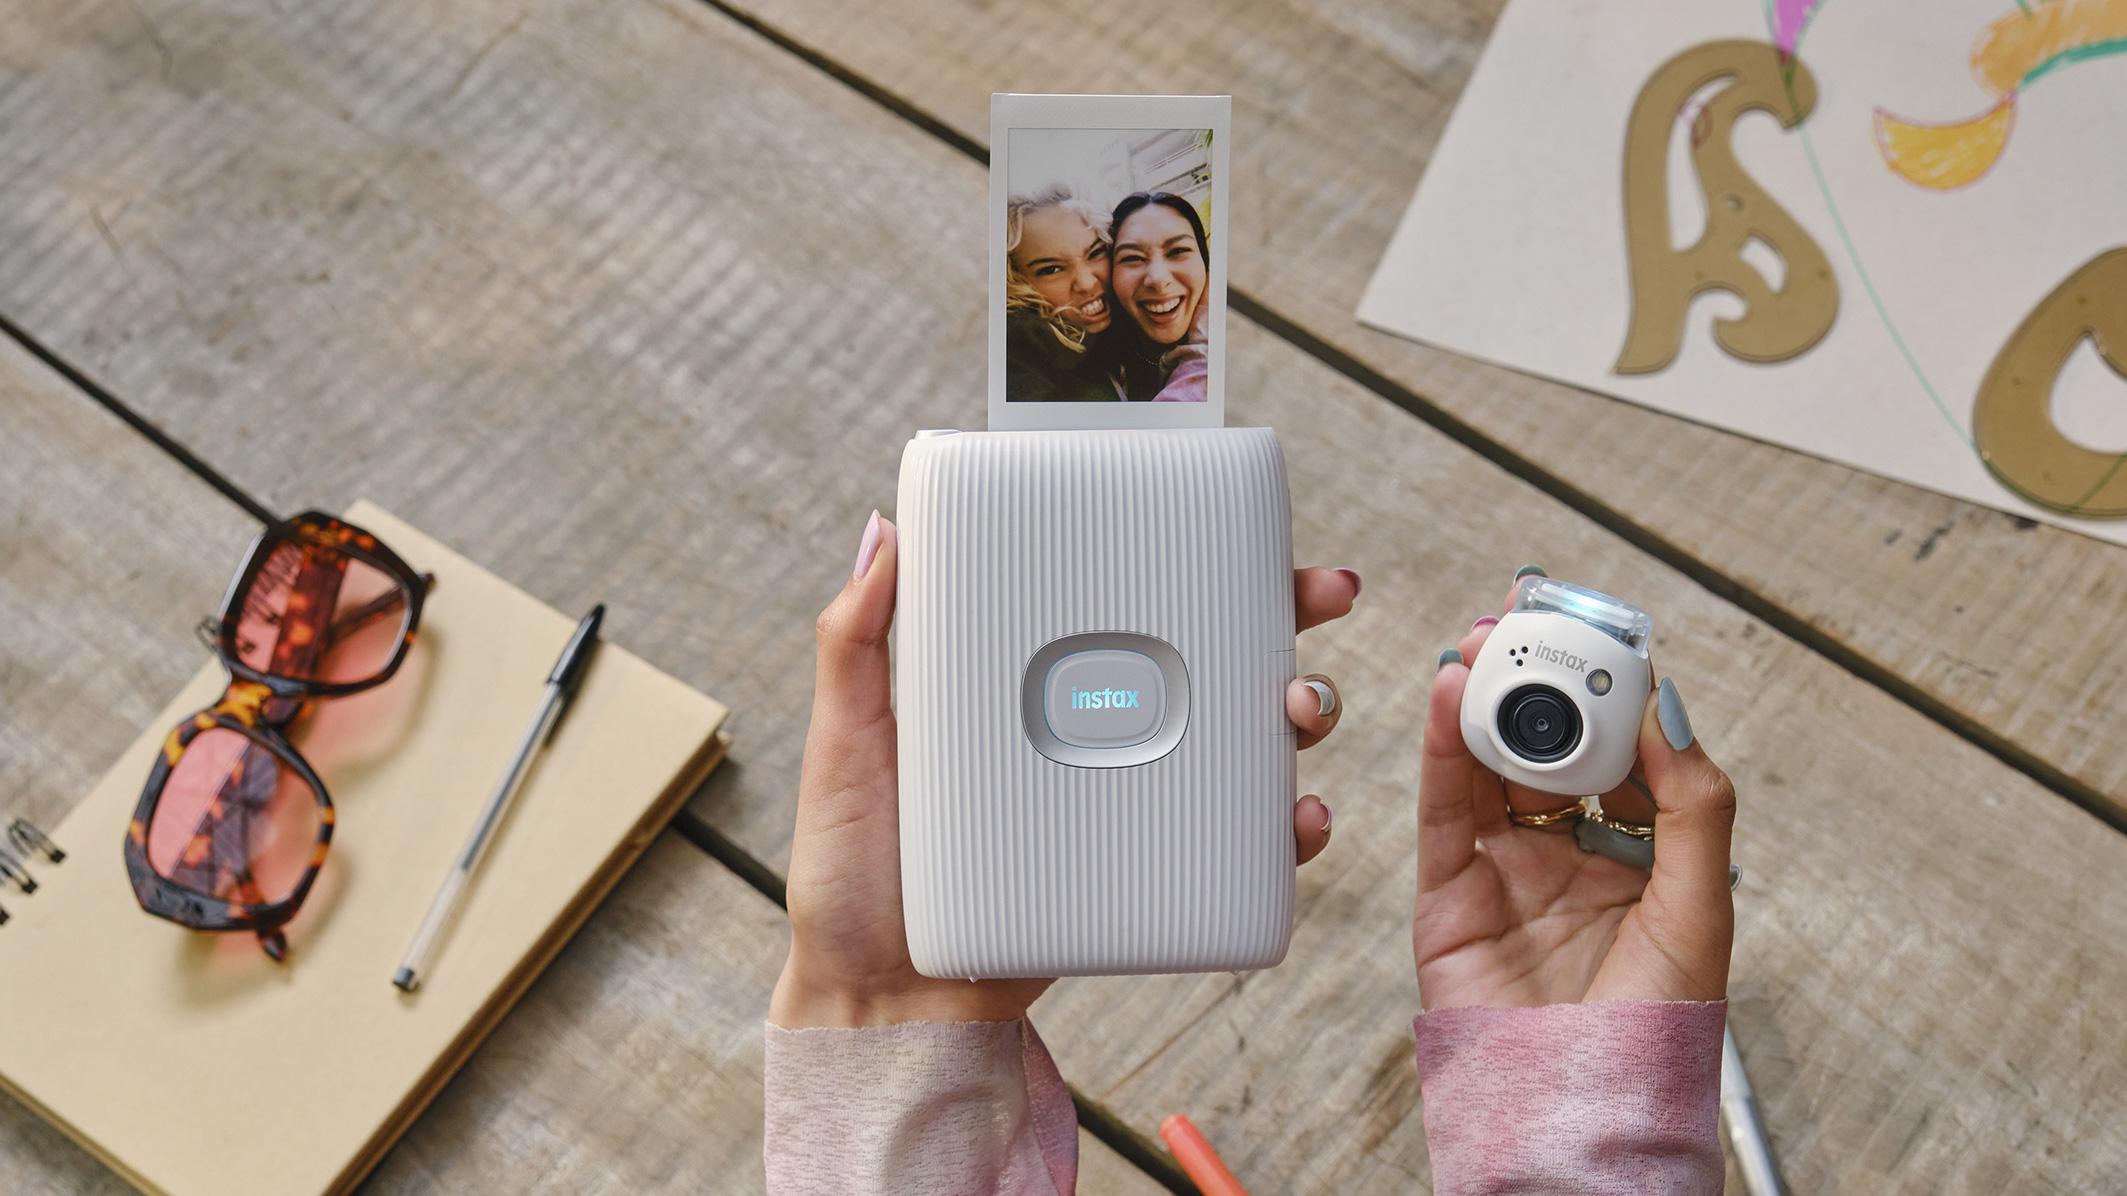 Fujifilm Instax Pal in the hand alongside a Instax Link printer with an instant film churned out